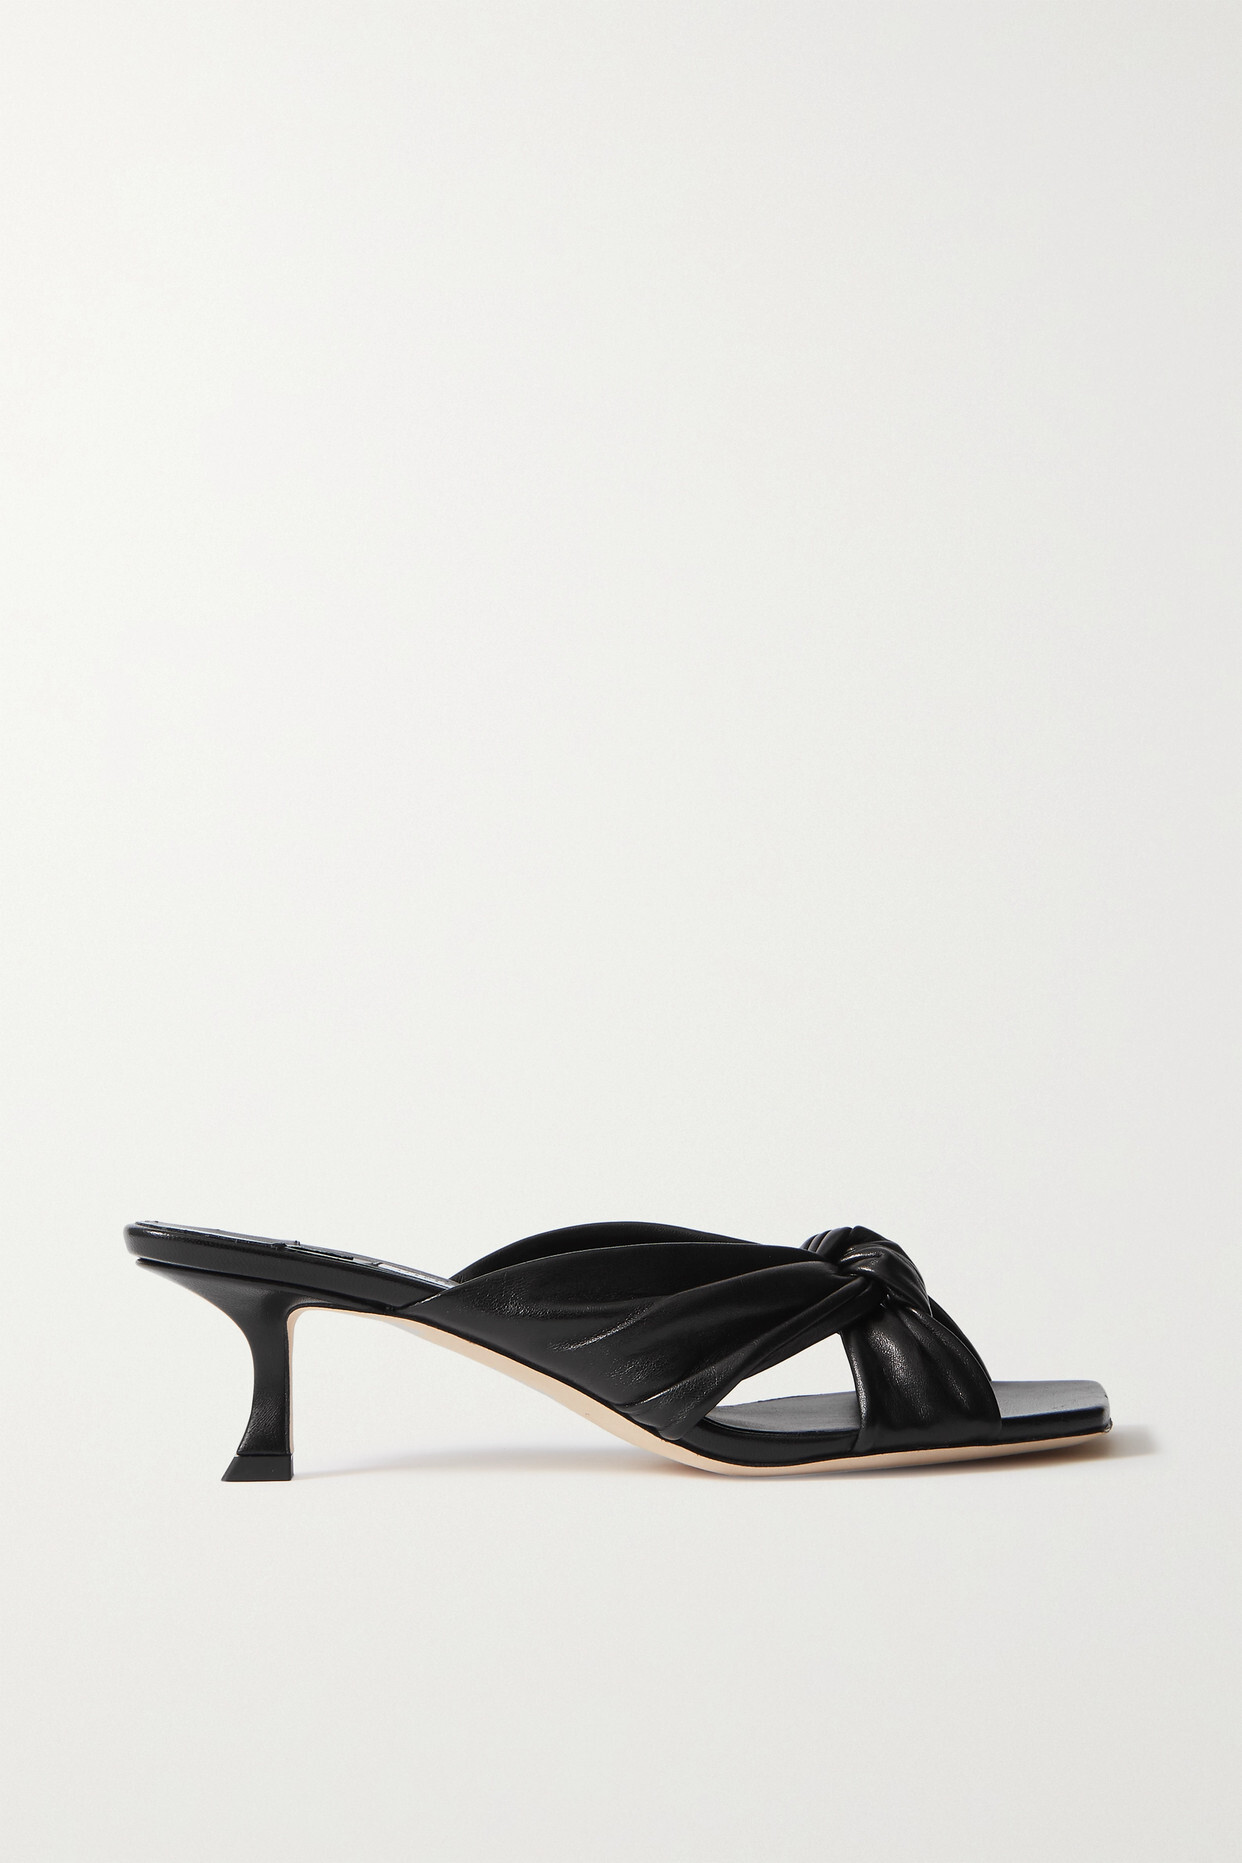 Jimmy Choo - Avenue 50 Knotted Leather Mules - Black